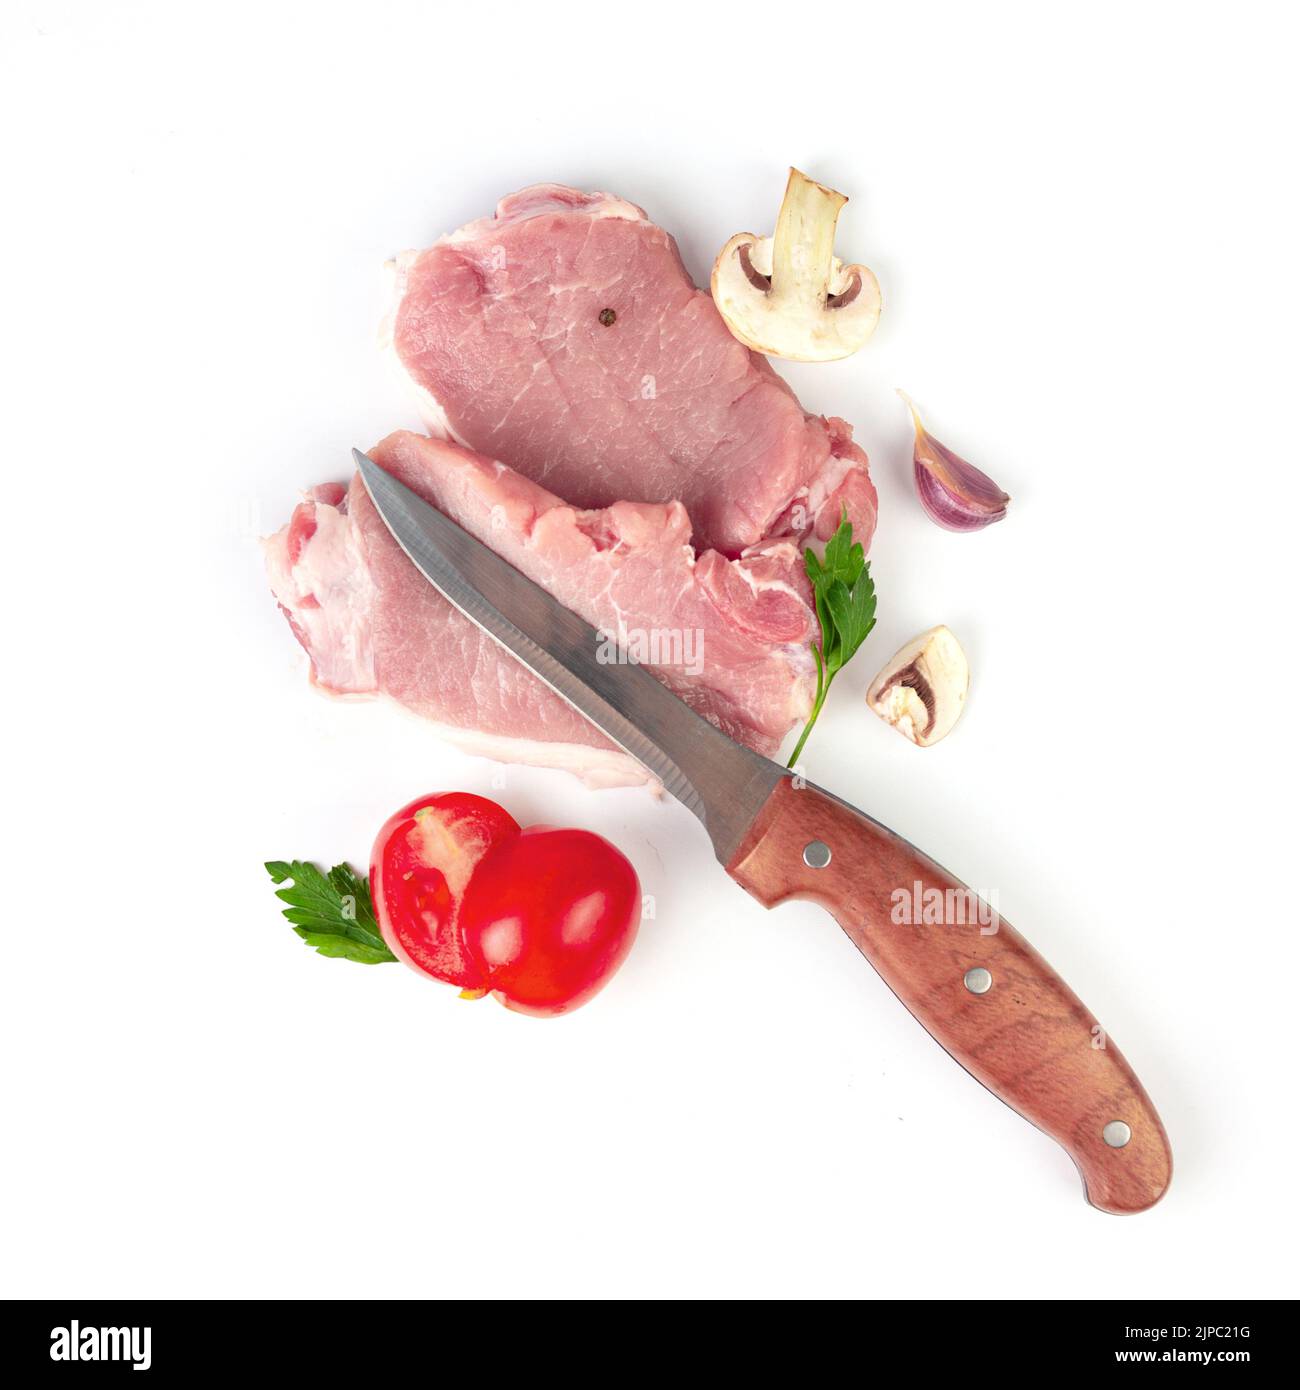 Fresh raw meat with herbs, spices, garlic, tomato, spice, pepper, champignon and butcher knife on white background. Stock Photo